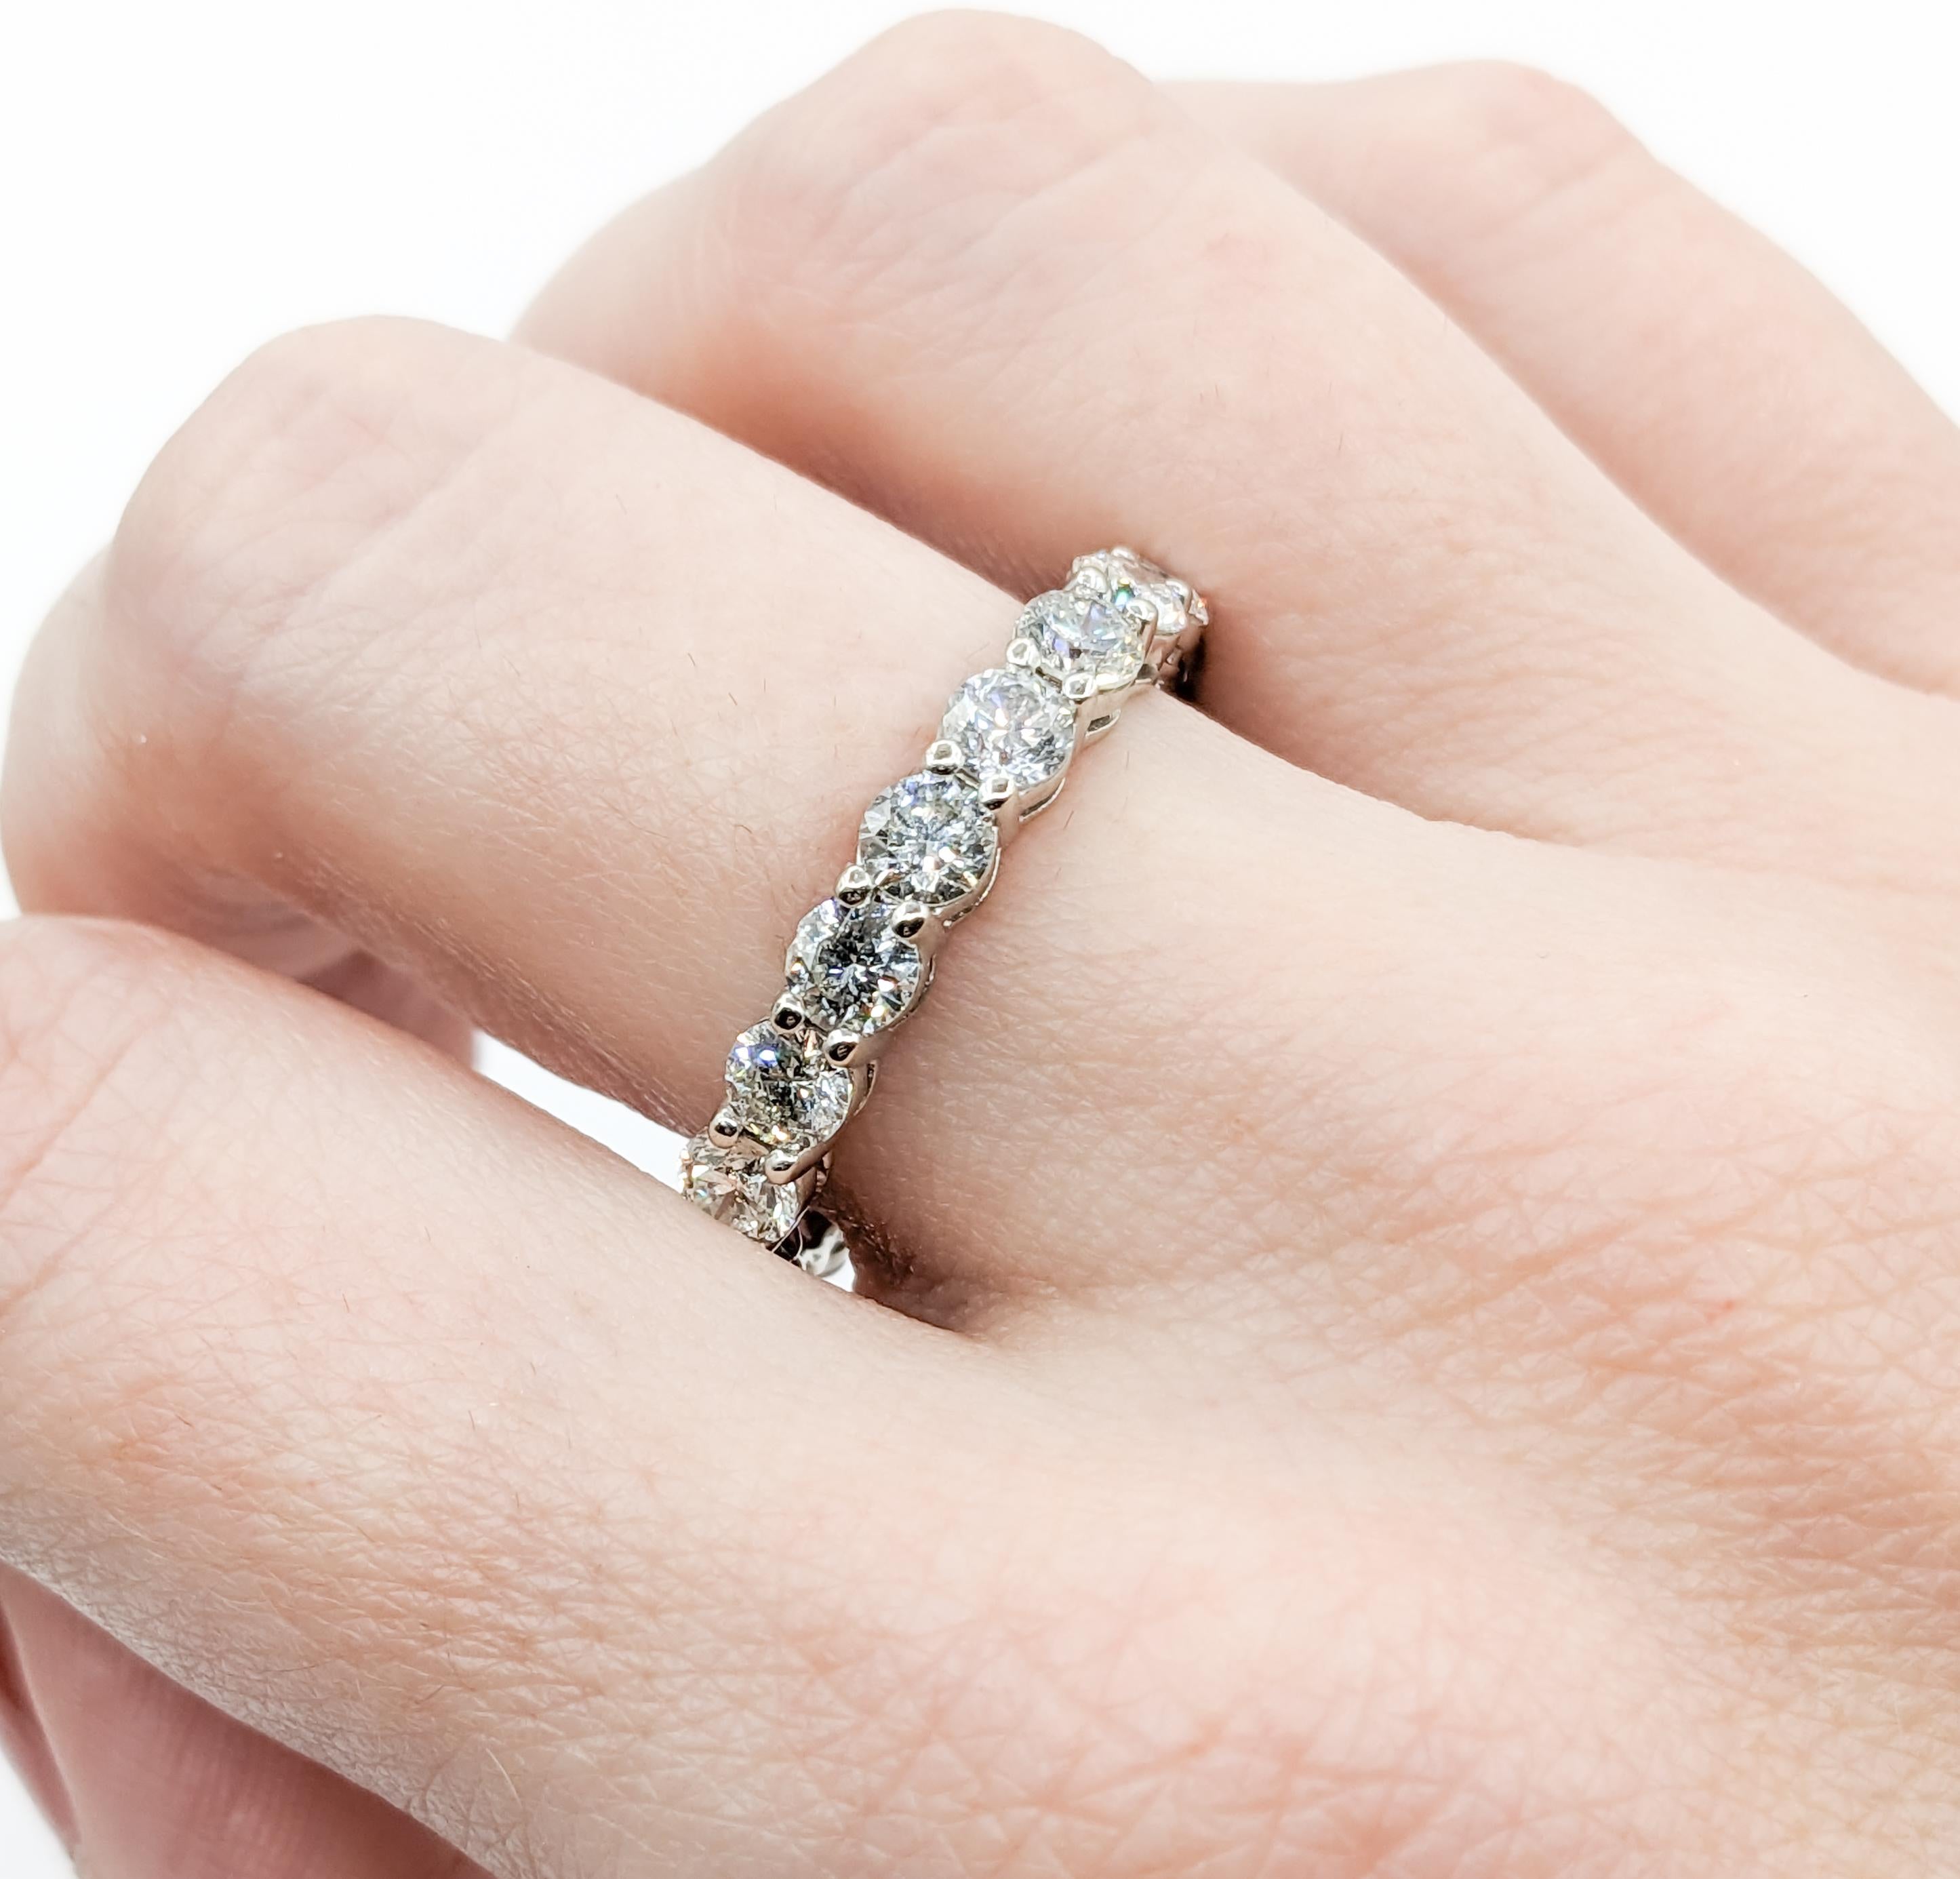 Dazzling Natural Diamond Eternity Band Ring in 18Kt White Gold

Crafted with precision, this stunning ring is made from 18kt white gold and is adorned with a total 3.8ctw of dazzling diamonds that sparkle brilliantly. The diamonds exhibit an I1